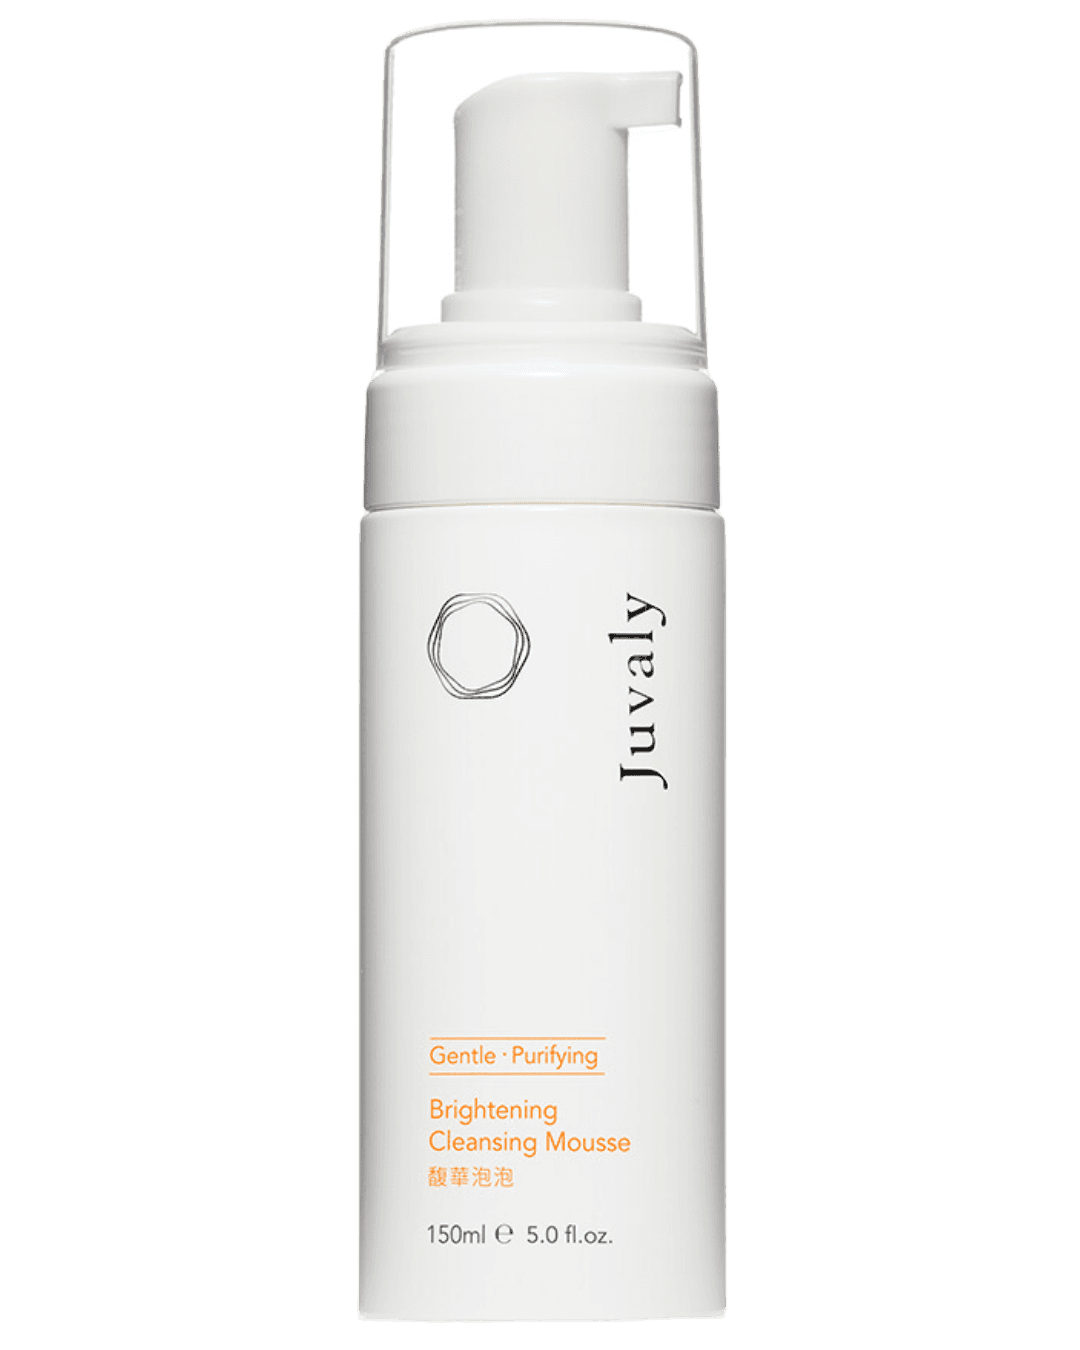 Juvaly Brightening Cleansing Mousse